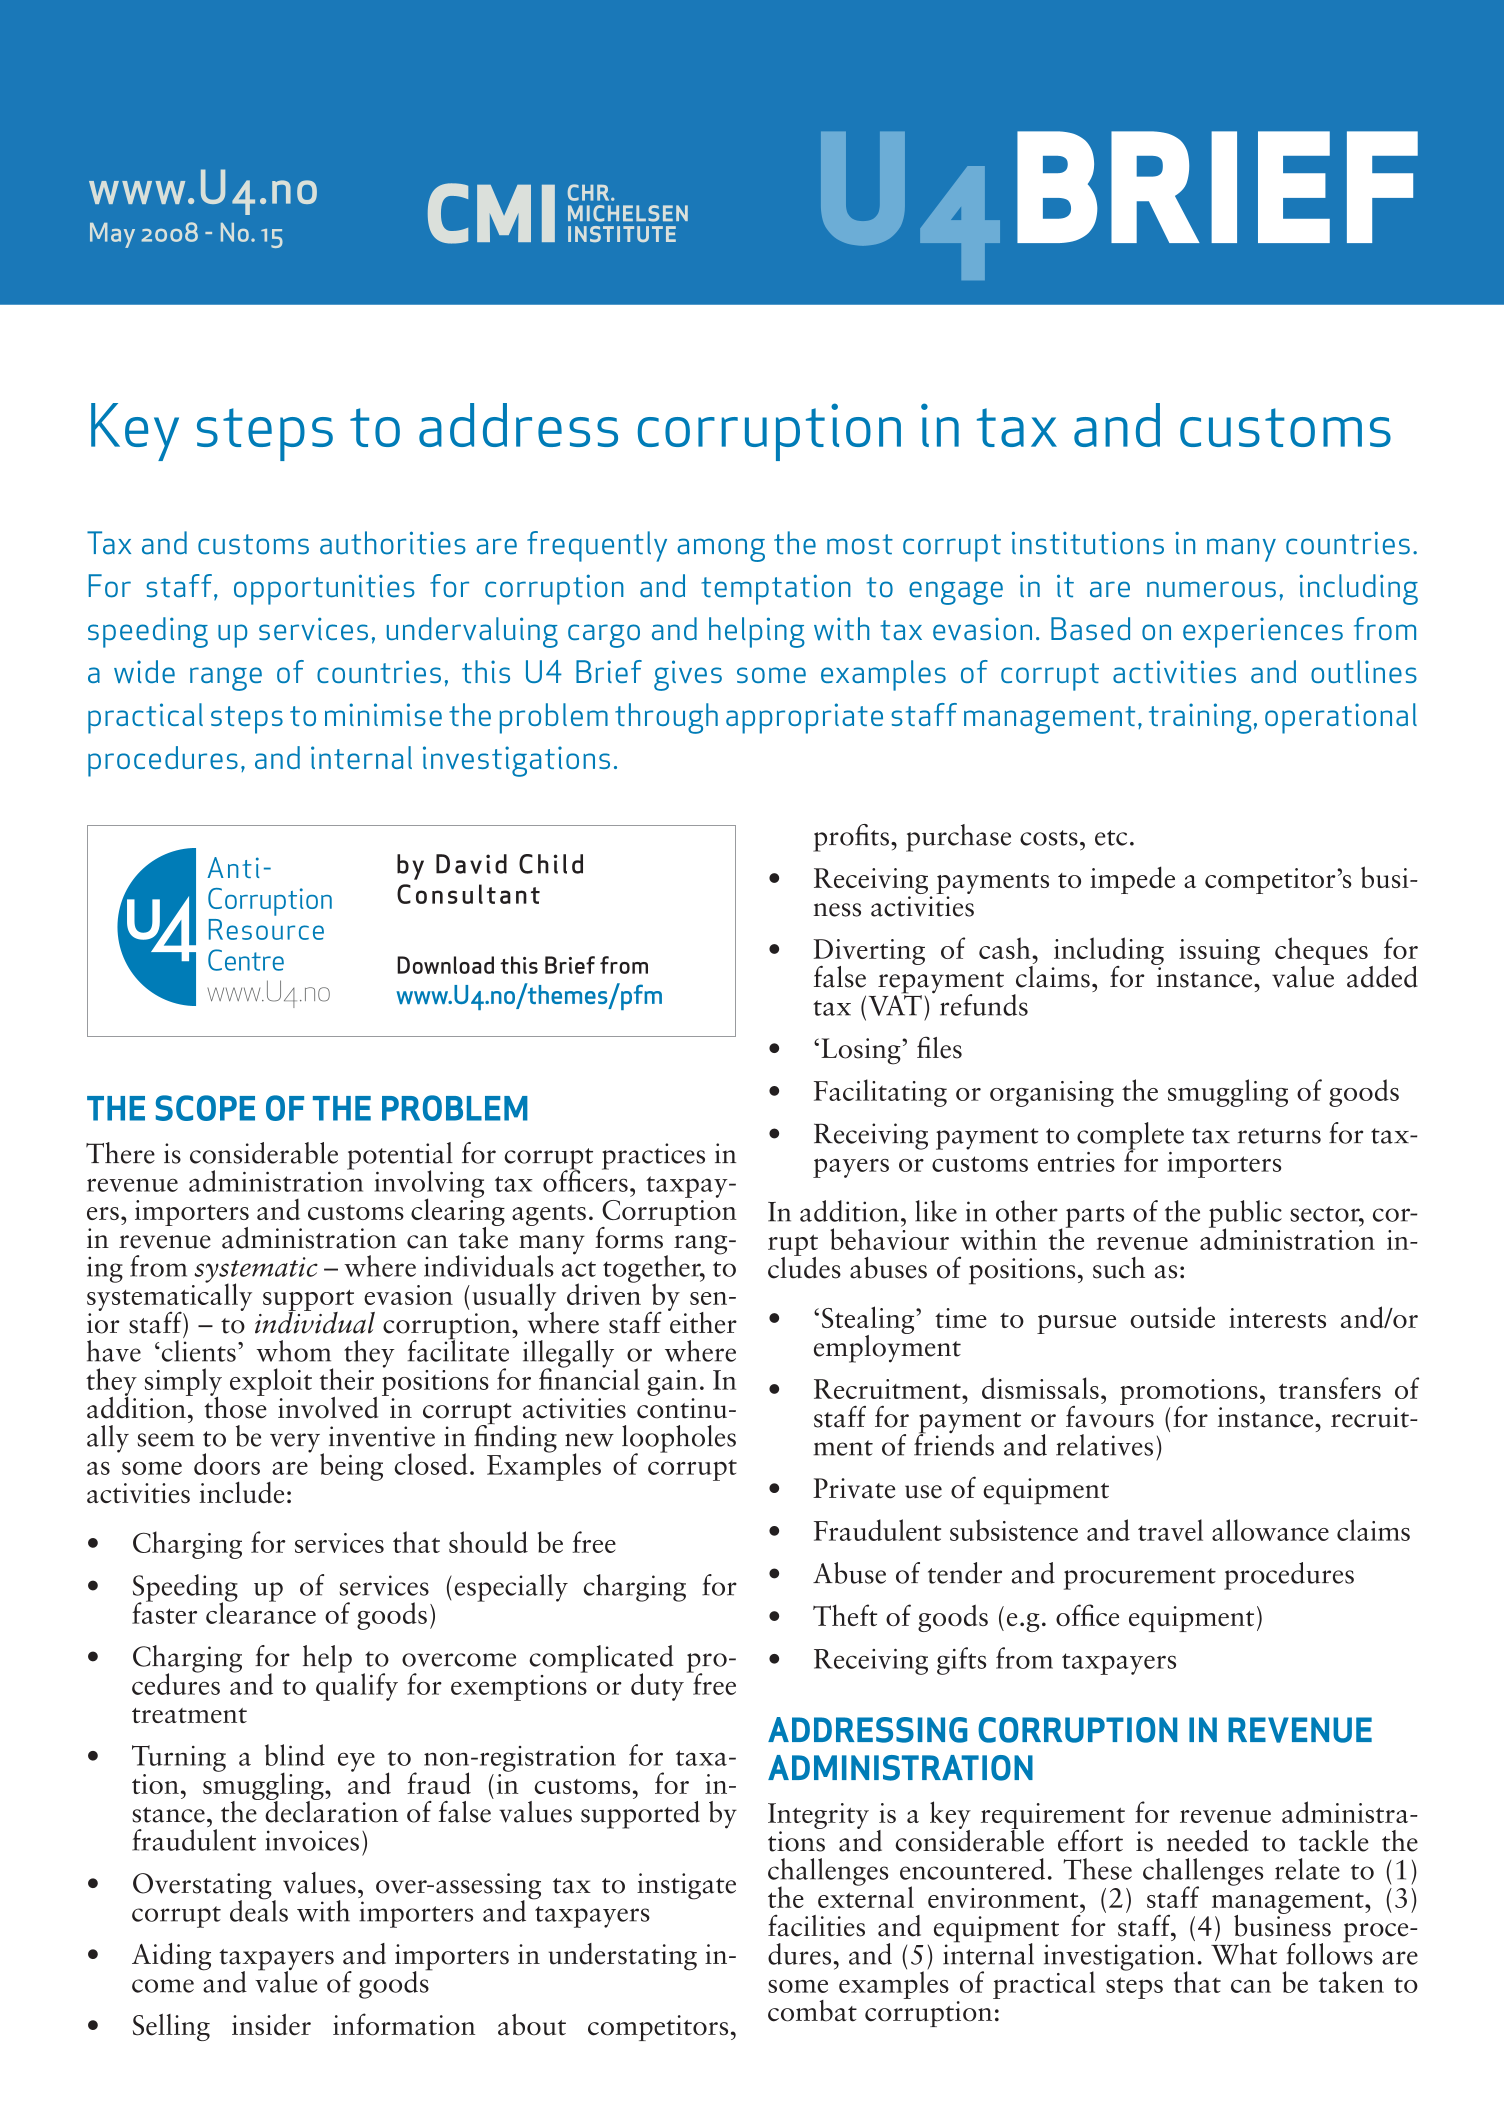 Key steps to address corruption in tax and customs